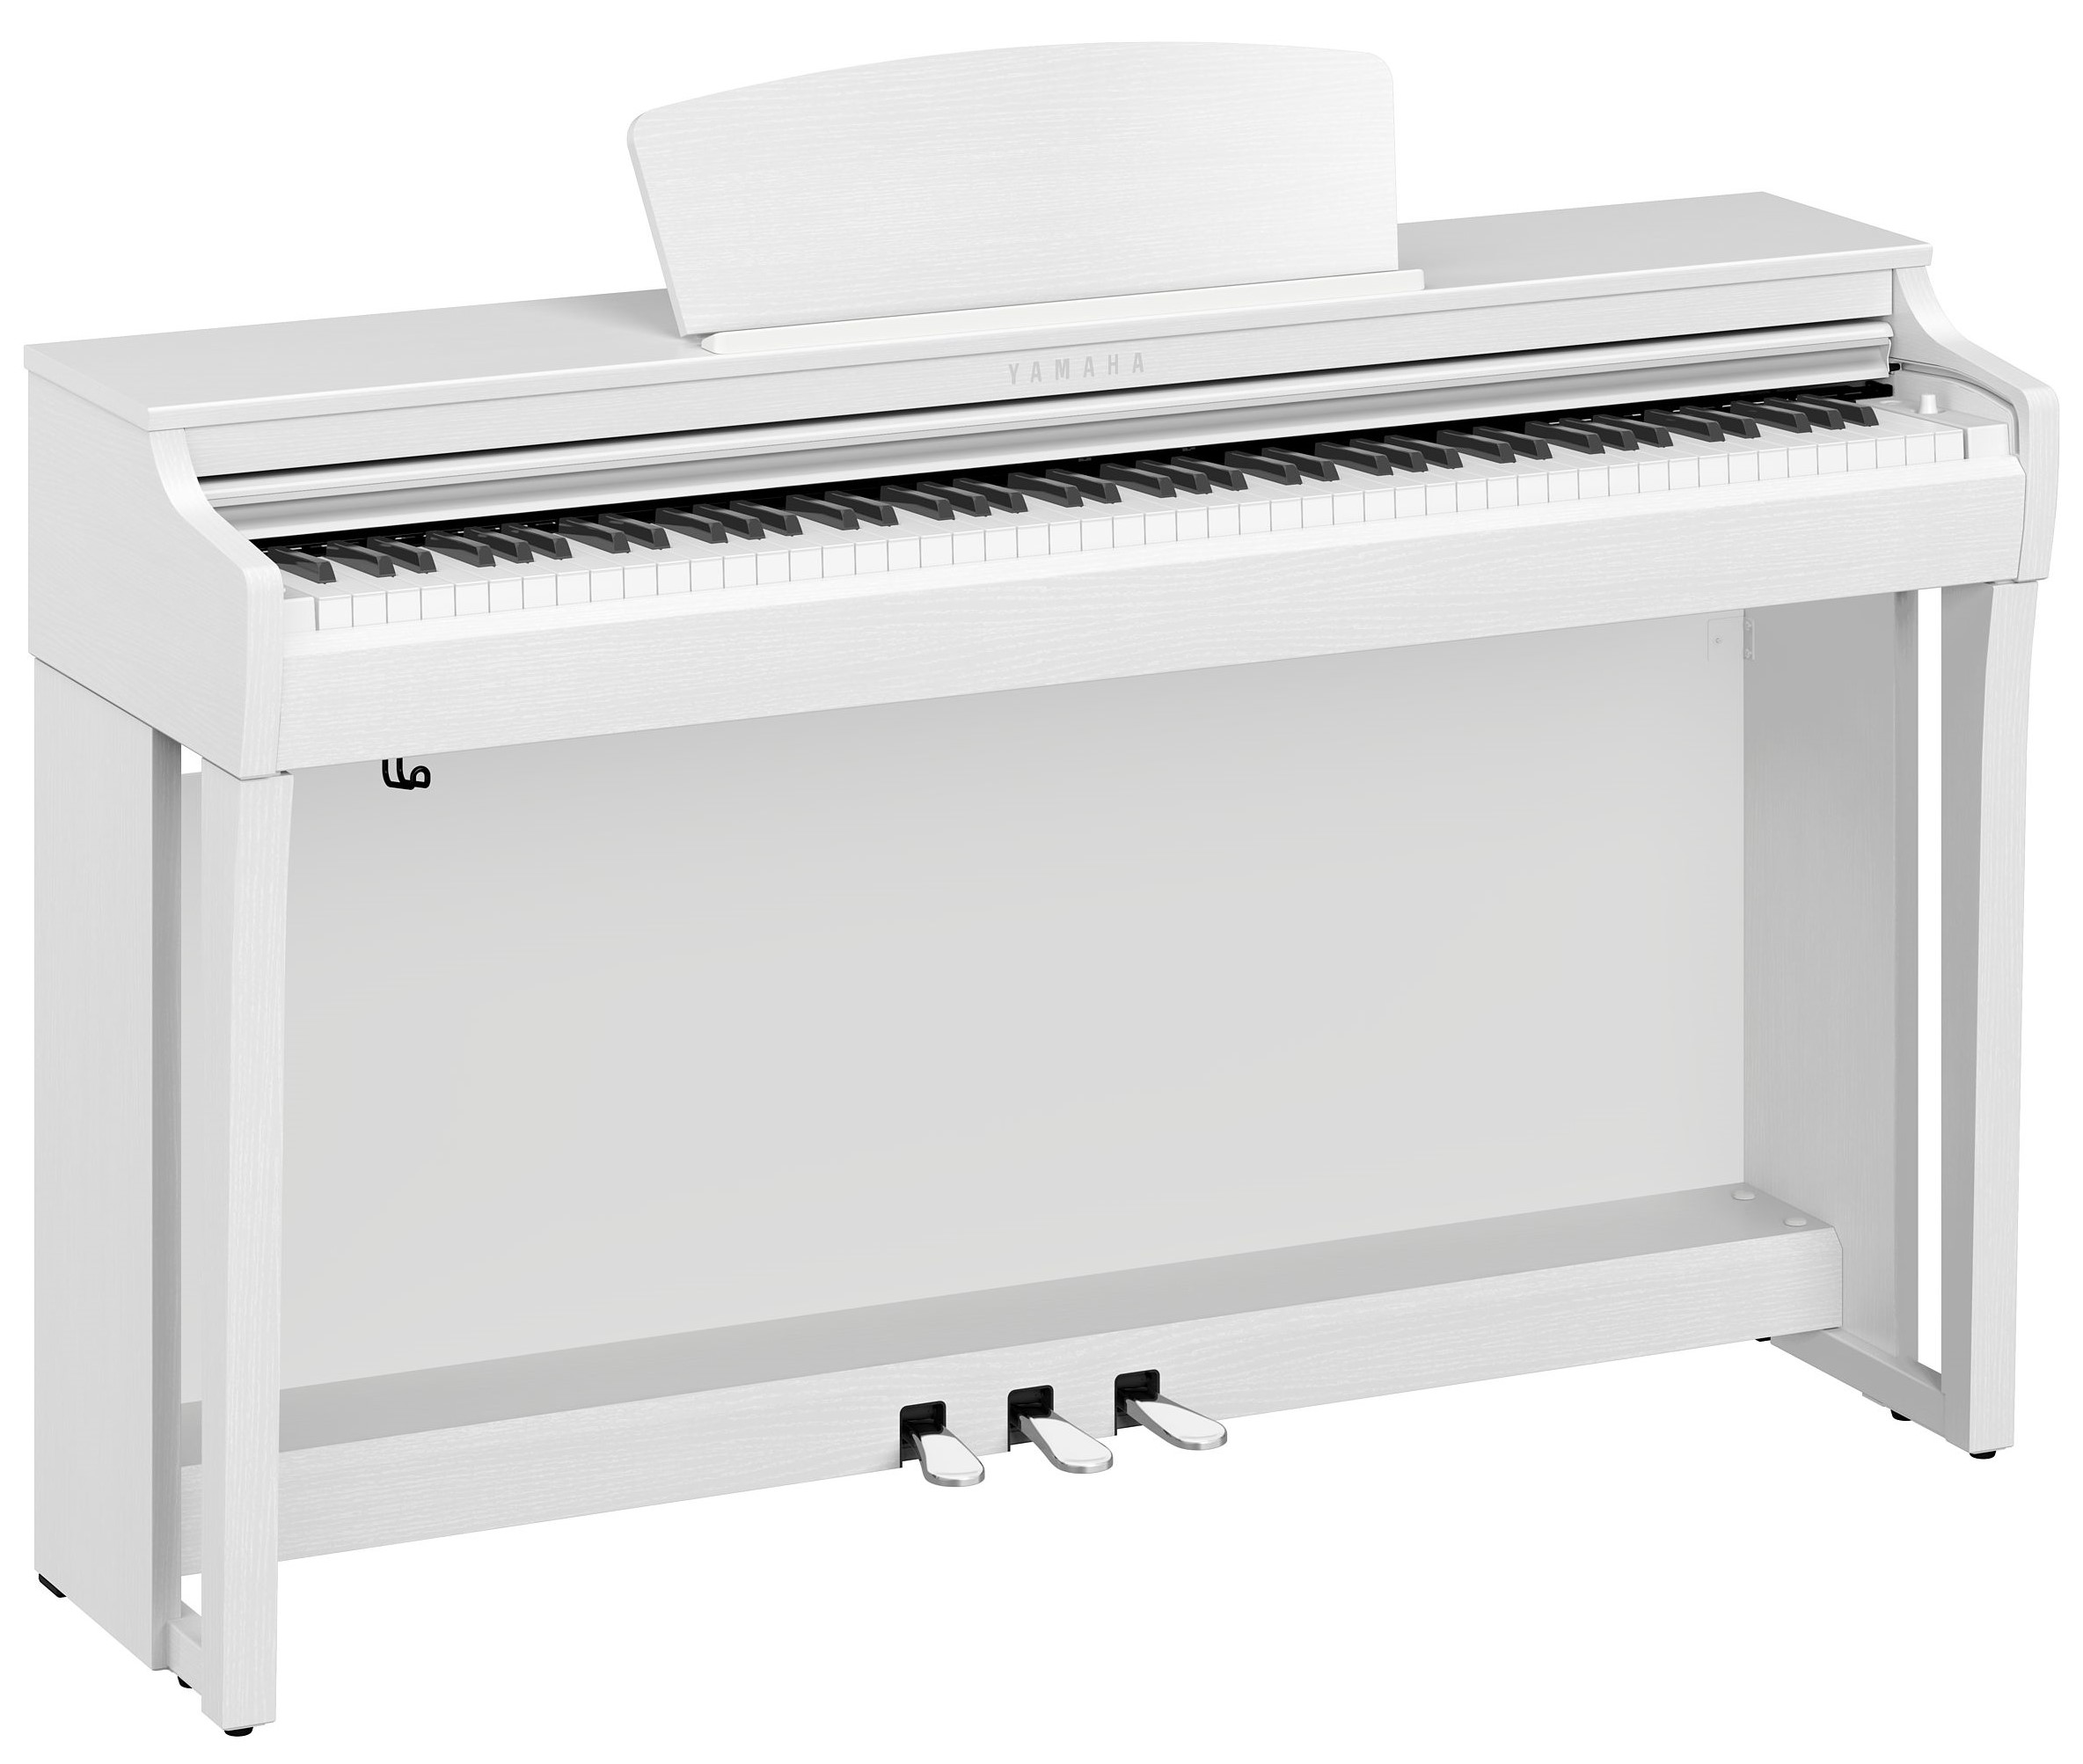 Yamaha Clp 725 Wh - Digital piano with stand - Variation 1